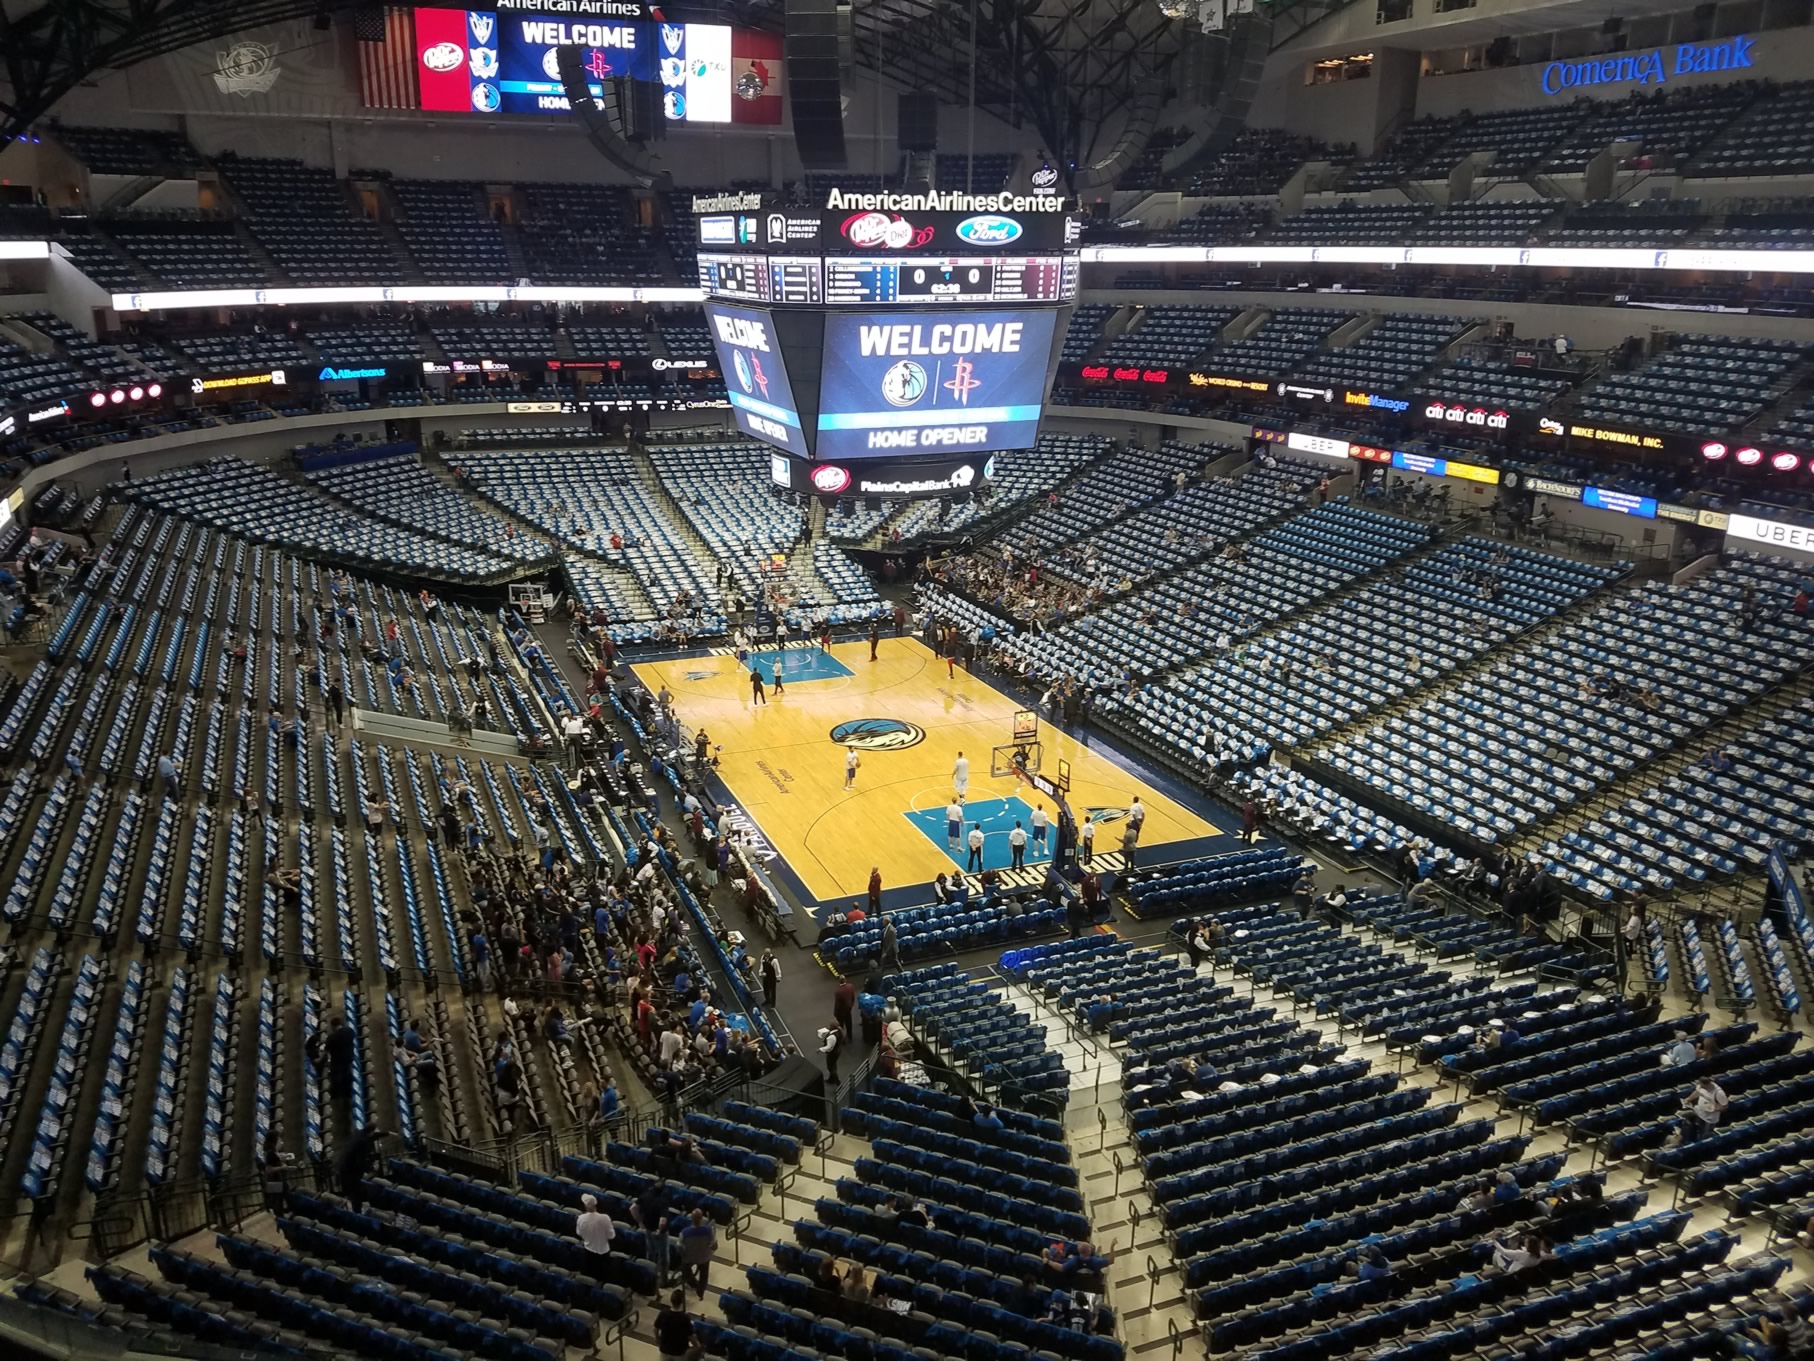 Section 320 at American Airlines Center 